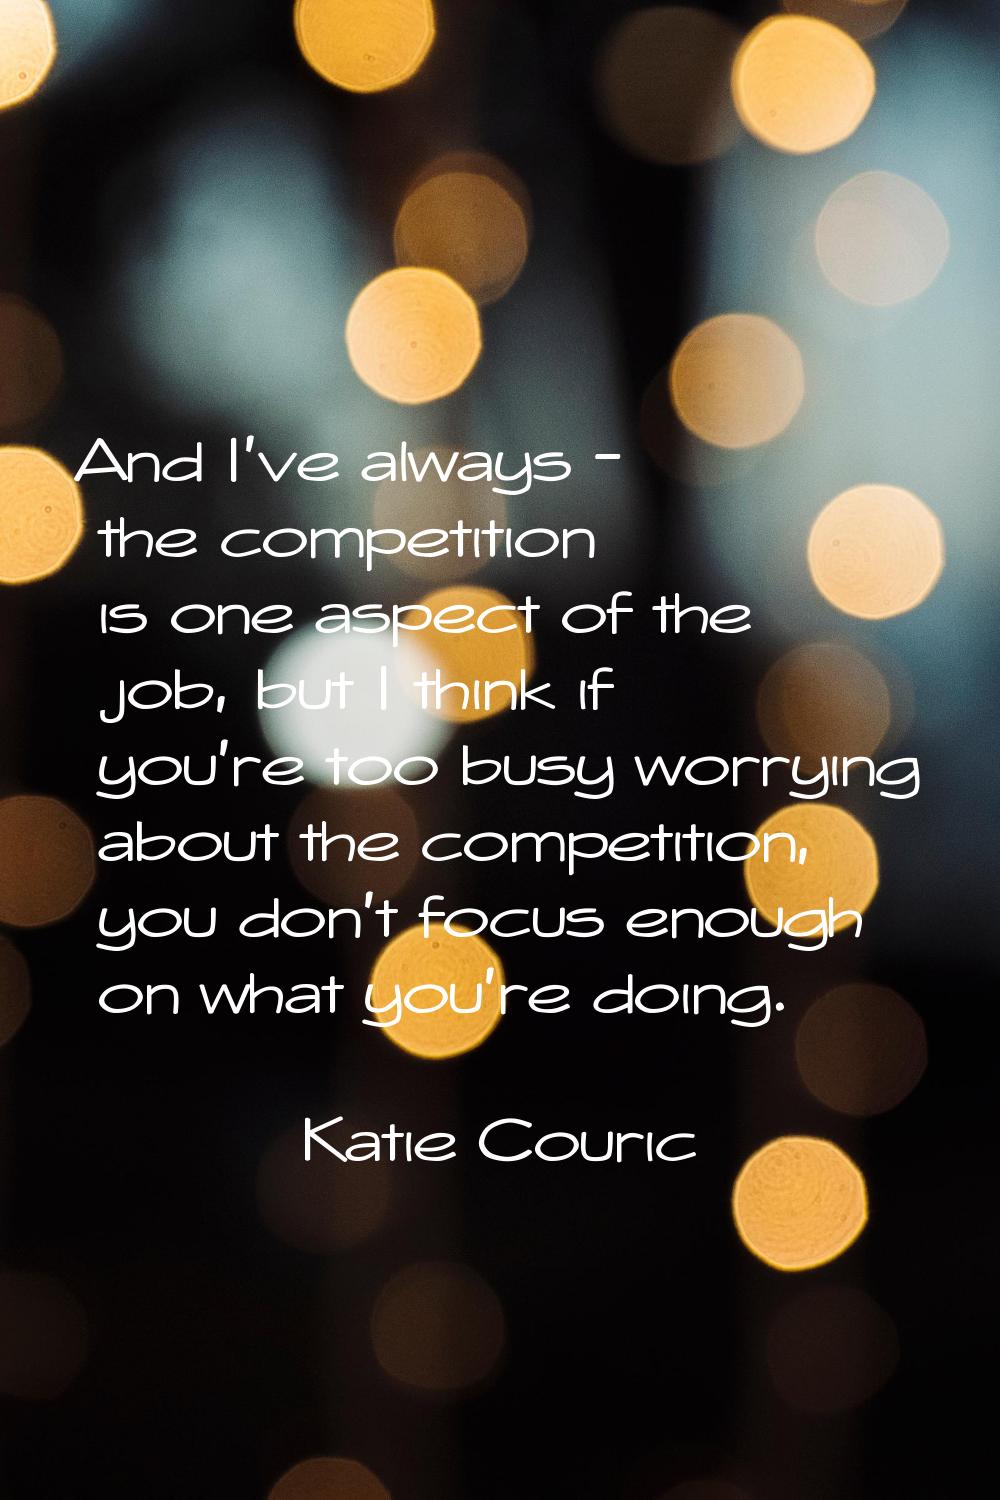 And I've always - the competition is one aspect of the job, but I think if you're too busy worrying